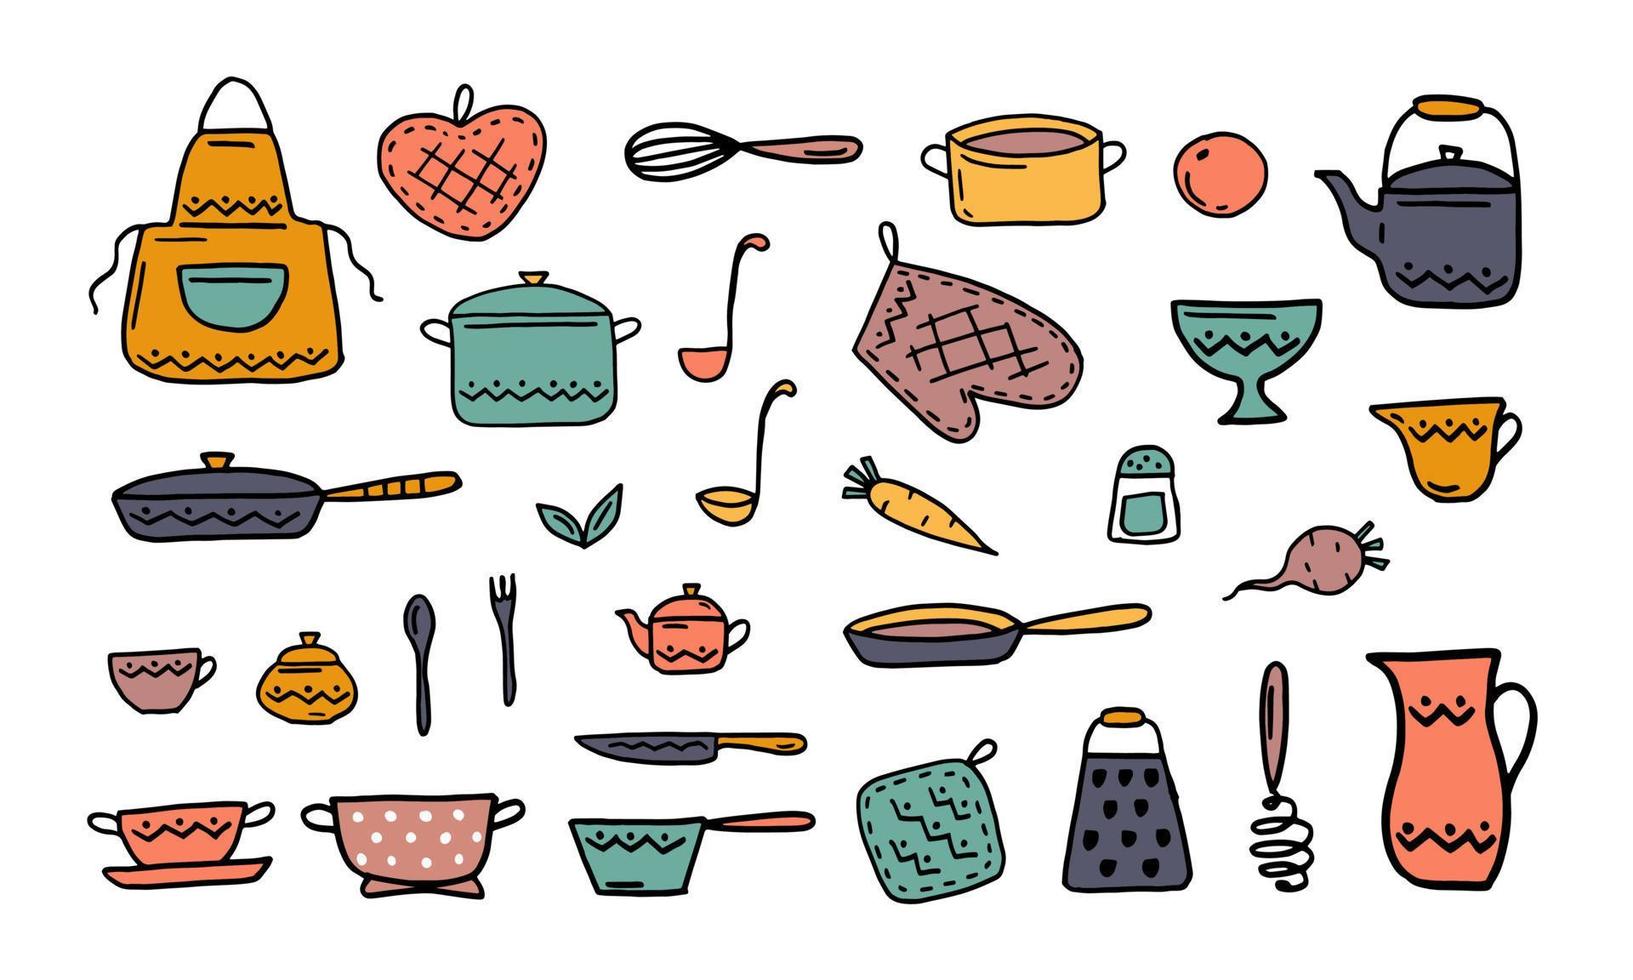 Vector Sketch Hand Drawn Illustration Of Kitchen Utensils Royalty Free SVG,  Cliparts, Vectors, and Stock Illustration. Image 36833780.